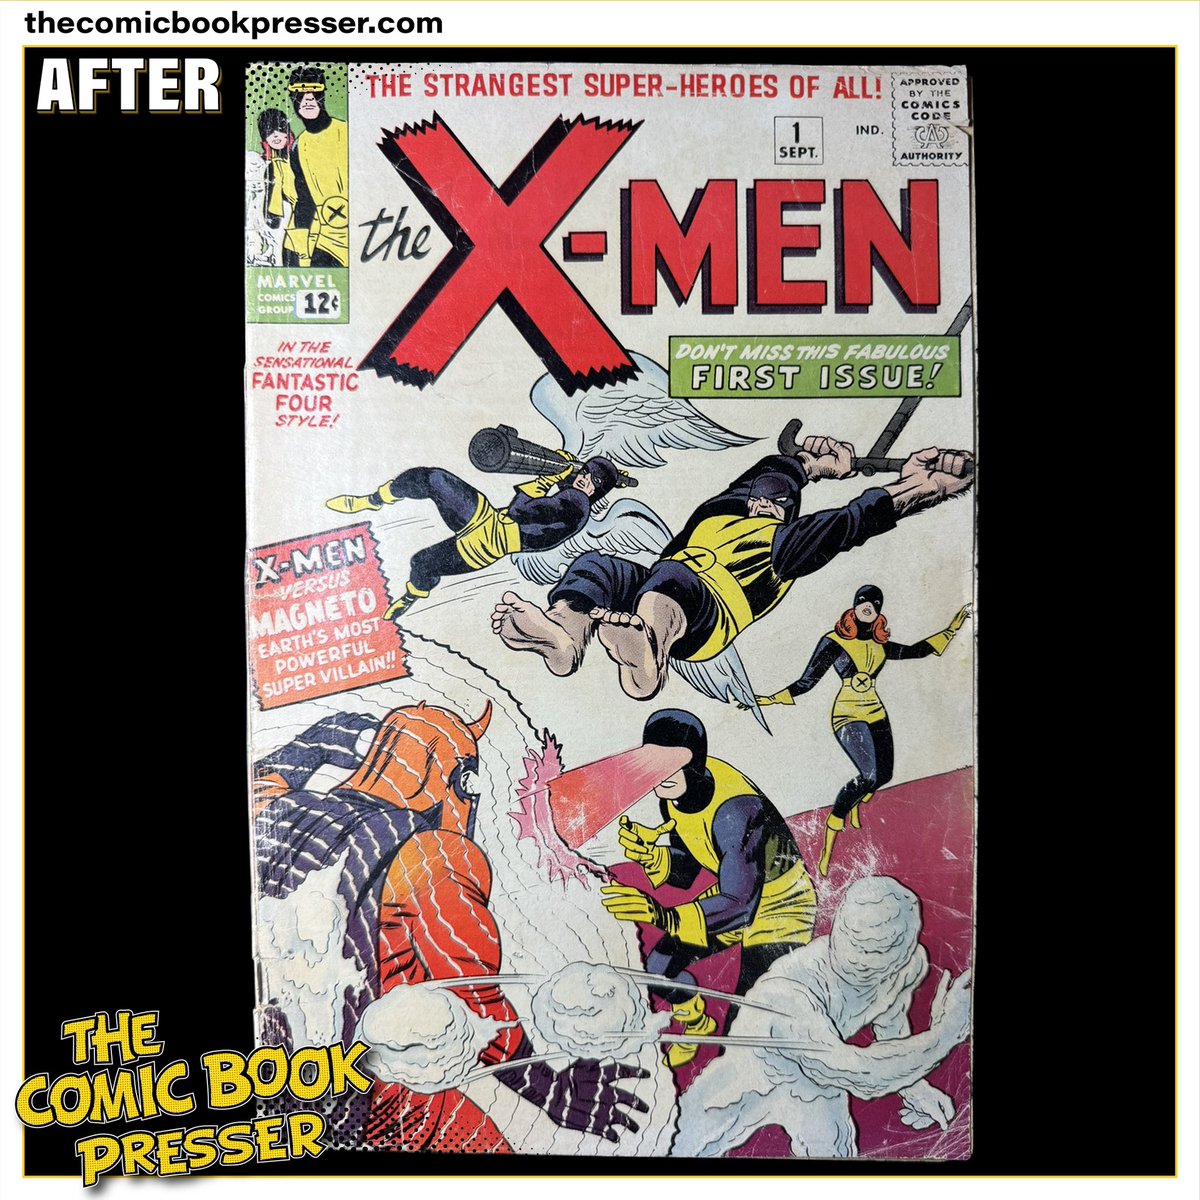 Think a well loved comic can’t be a centerpiece? Think again. We cleaned and pressed a CGC 0.5 missing a page, and it’s now a stunning display piece for our client.
#thecomicbookpresser #comicpressing #comicbookpressing #xmen #comics #marvelcomics #comicbooks #comicbookcollection